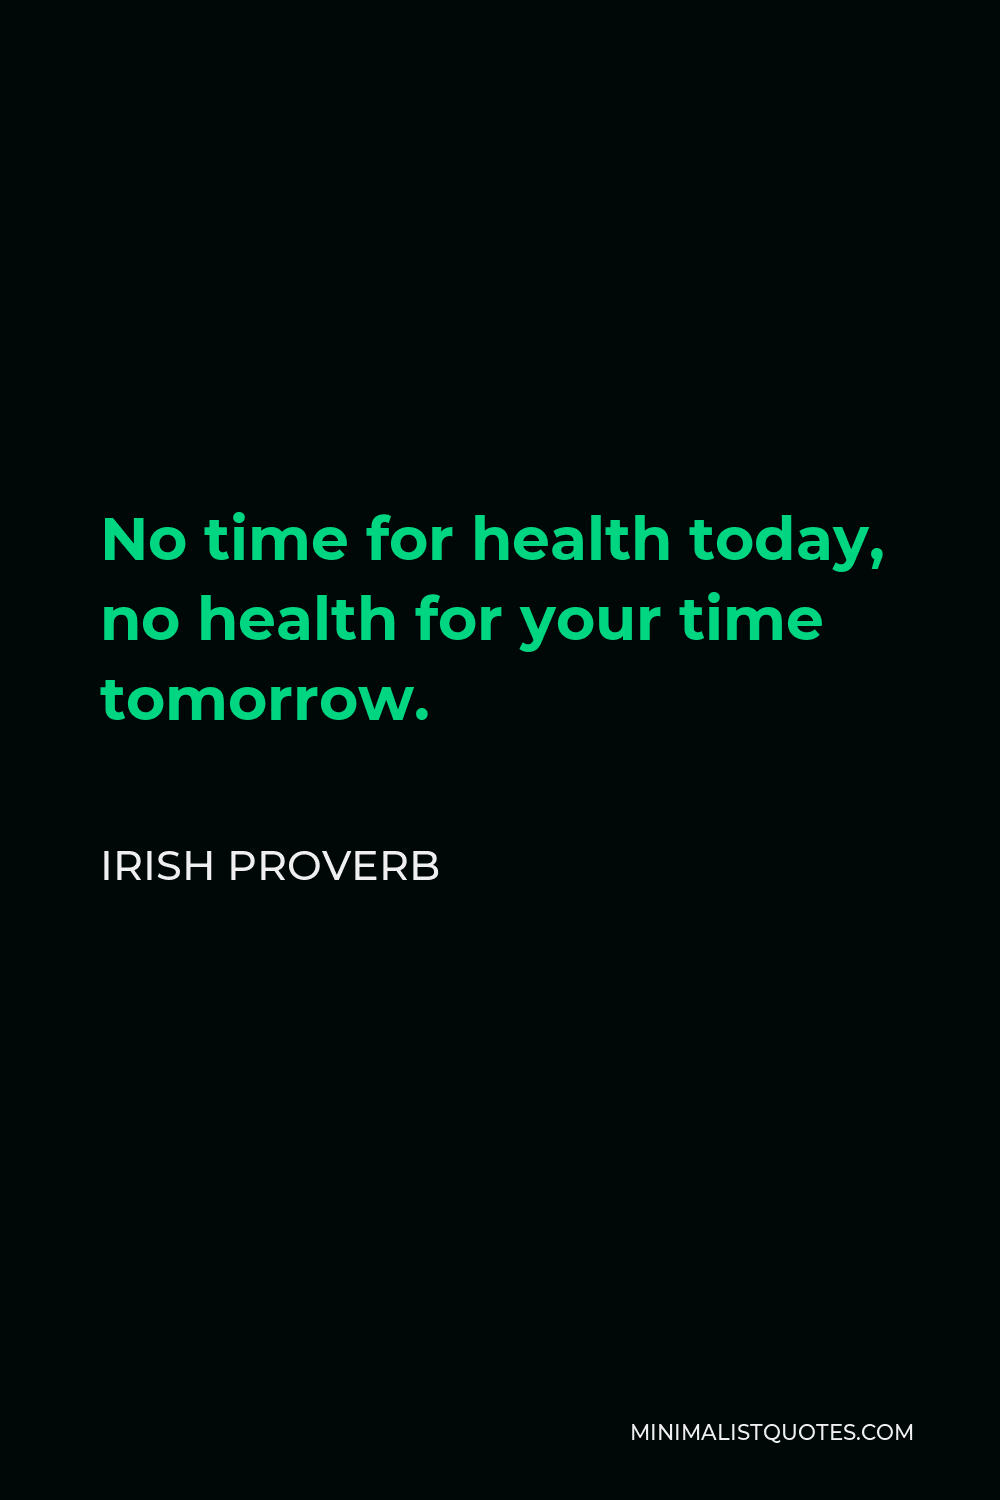 Irish Proverb Quote - No time for health today, no health for your time tomorrow.